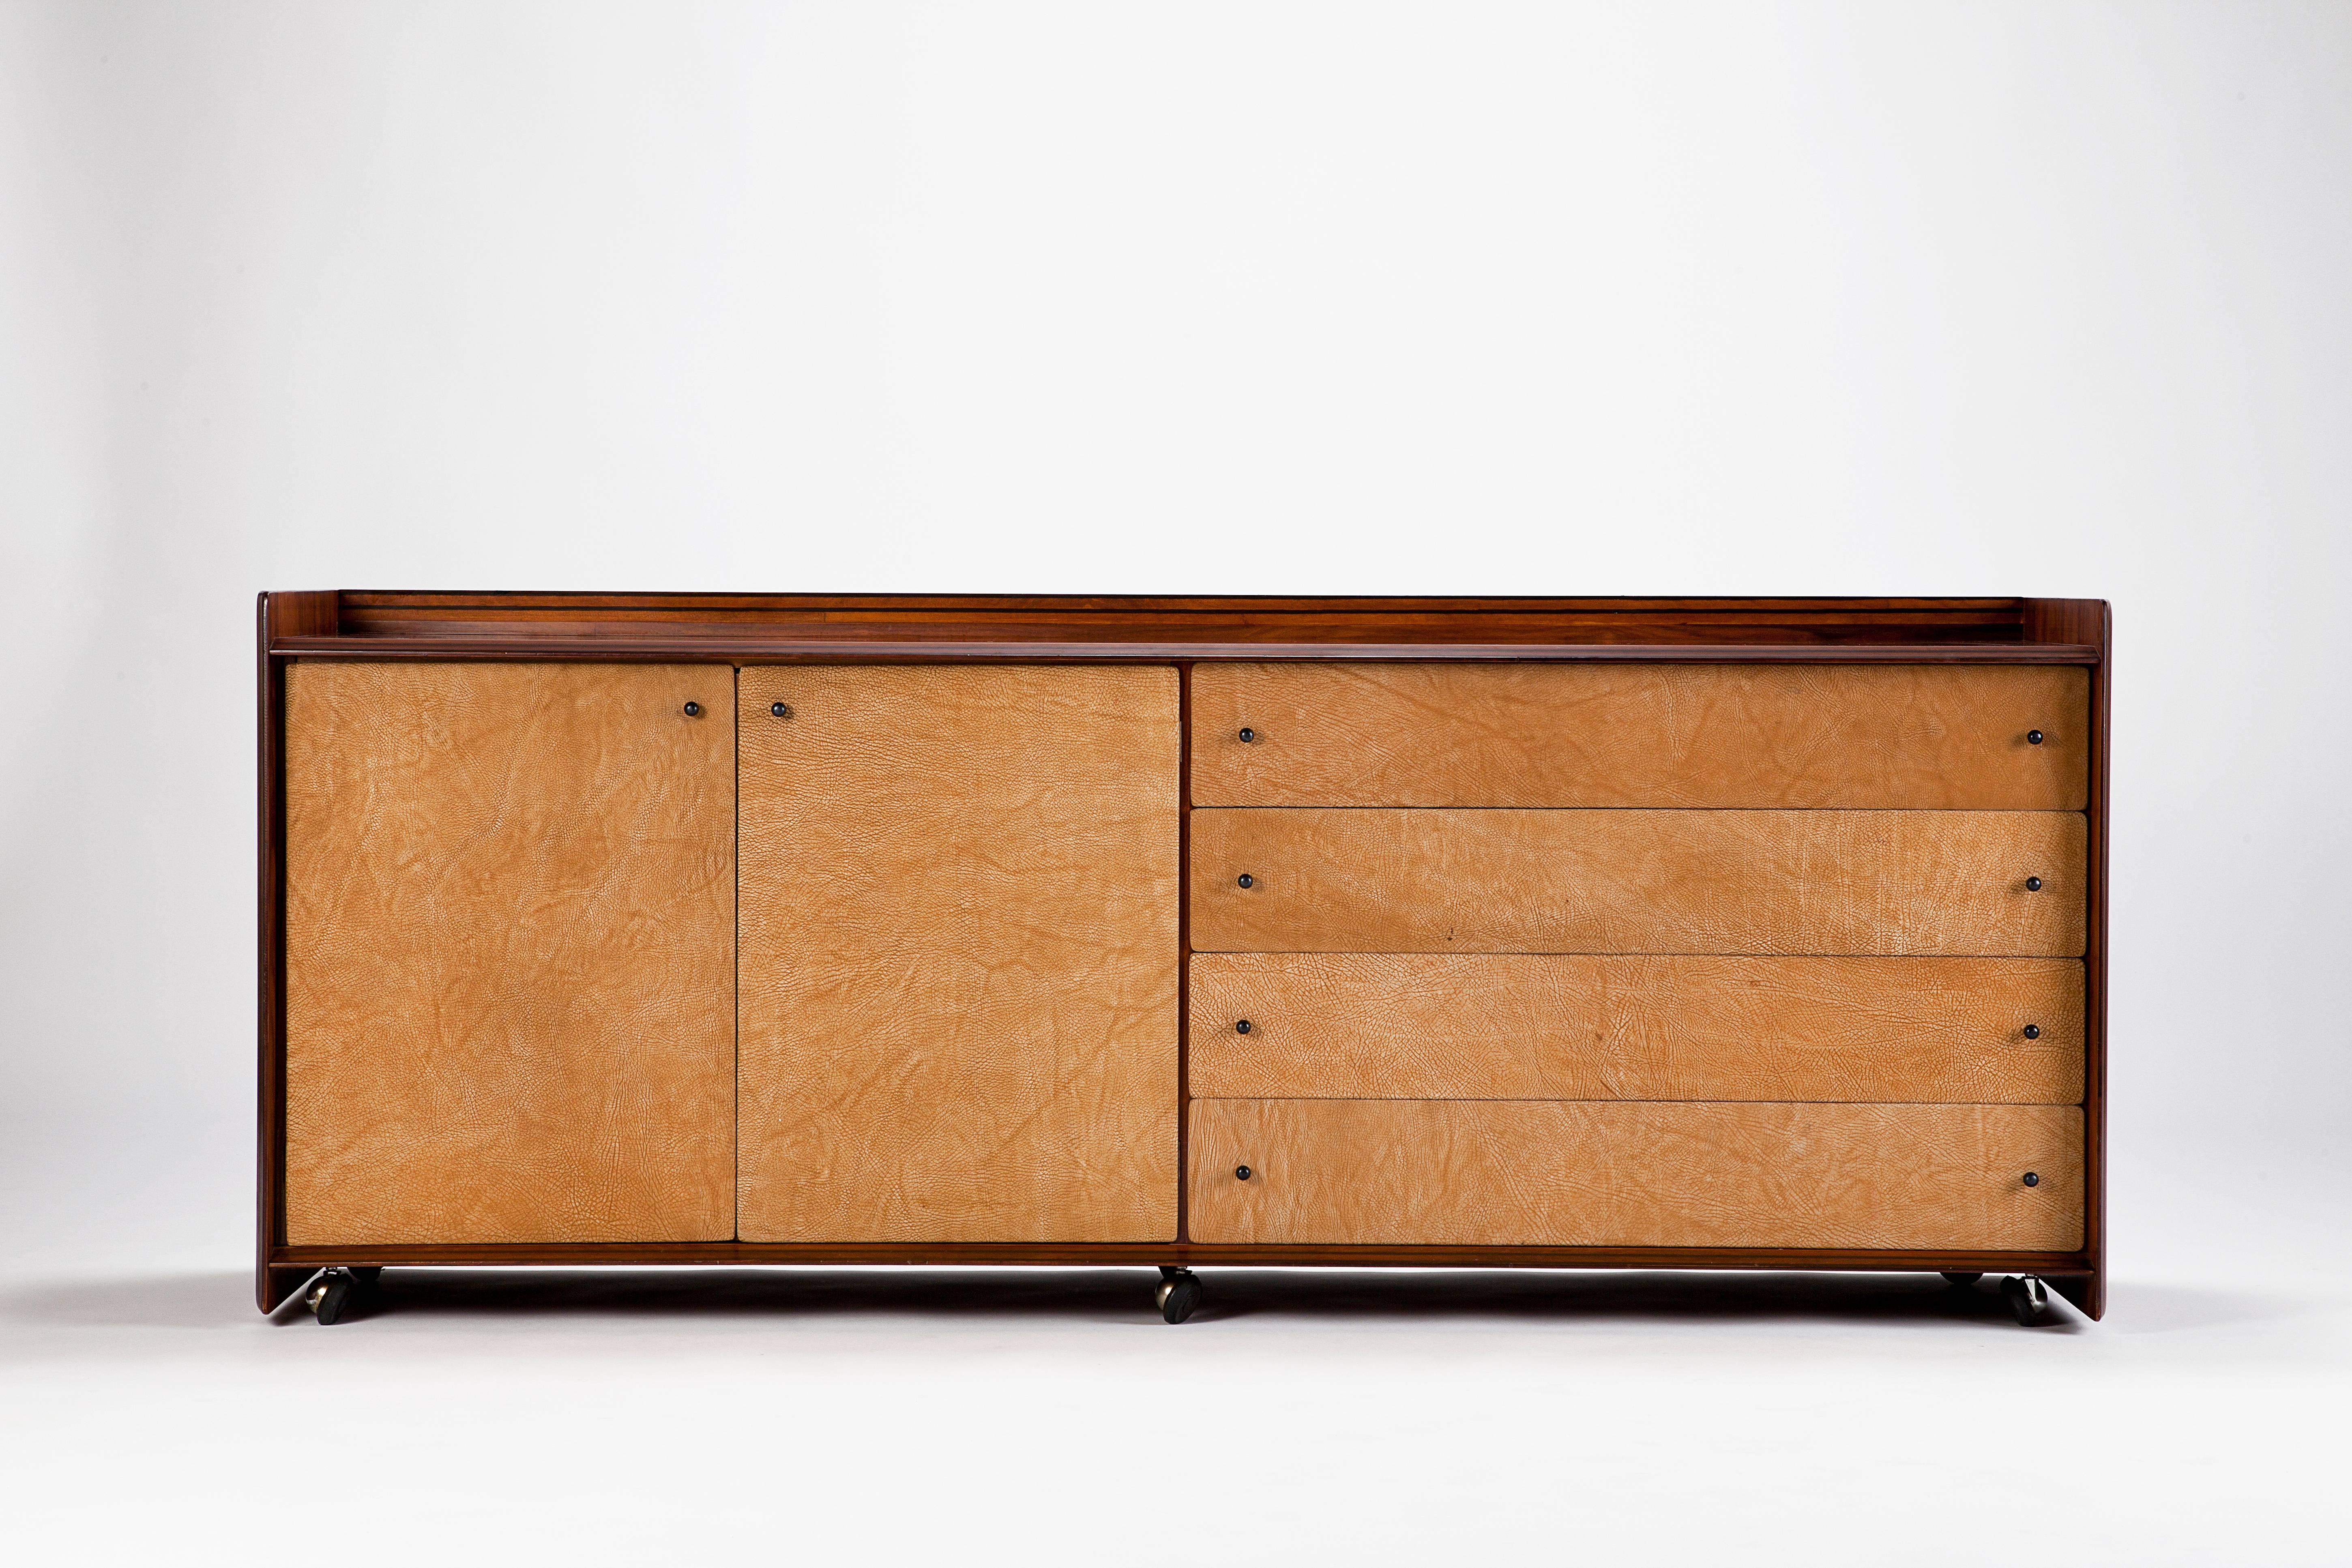 Sideboard from Afra & Tobia Scarpa manufactured by Maxalto in Italy in the 1980s. Very rare rosewood sideboard with suede front. The beautiful back makes it an ideal rom divider.